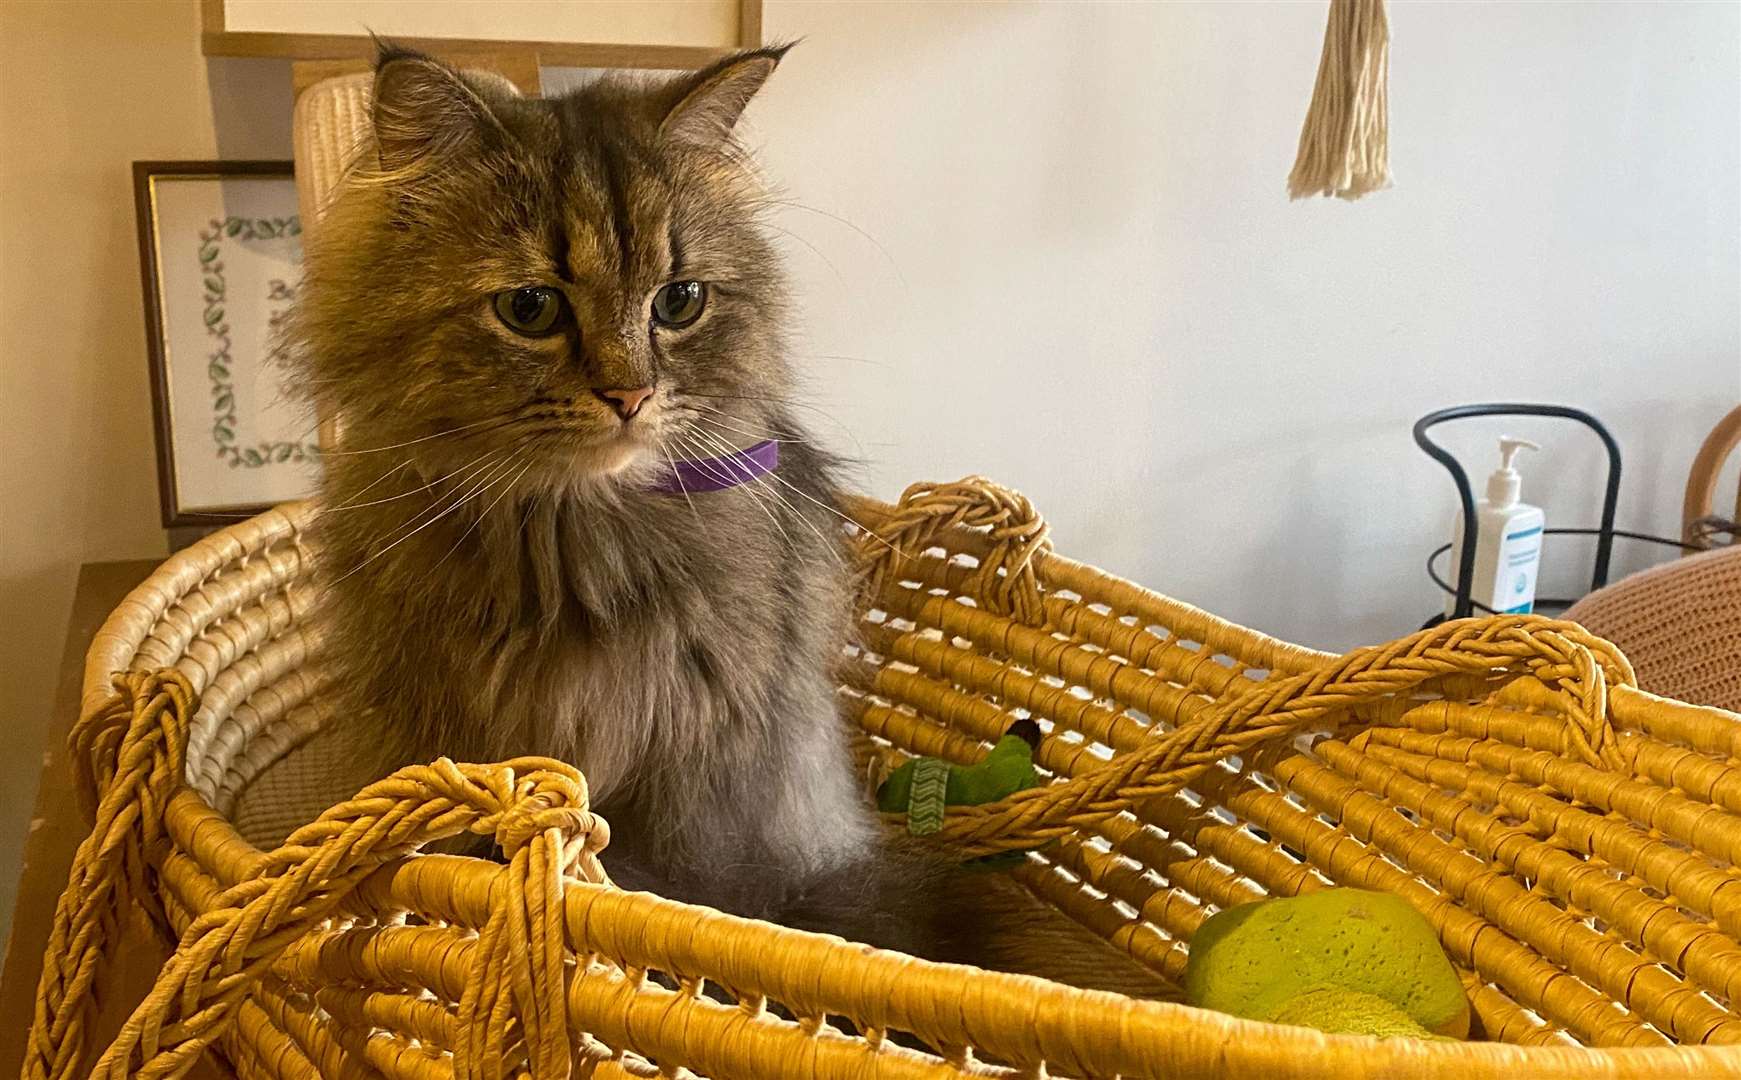 Fluffy feline Fungus posed in his basket for photos